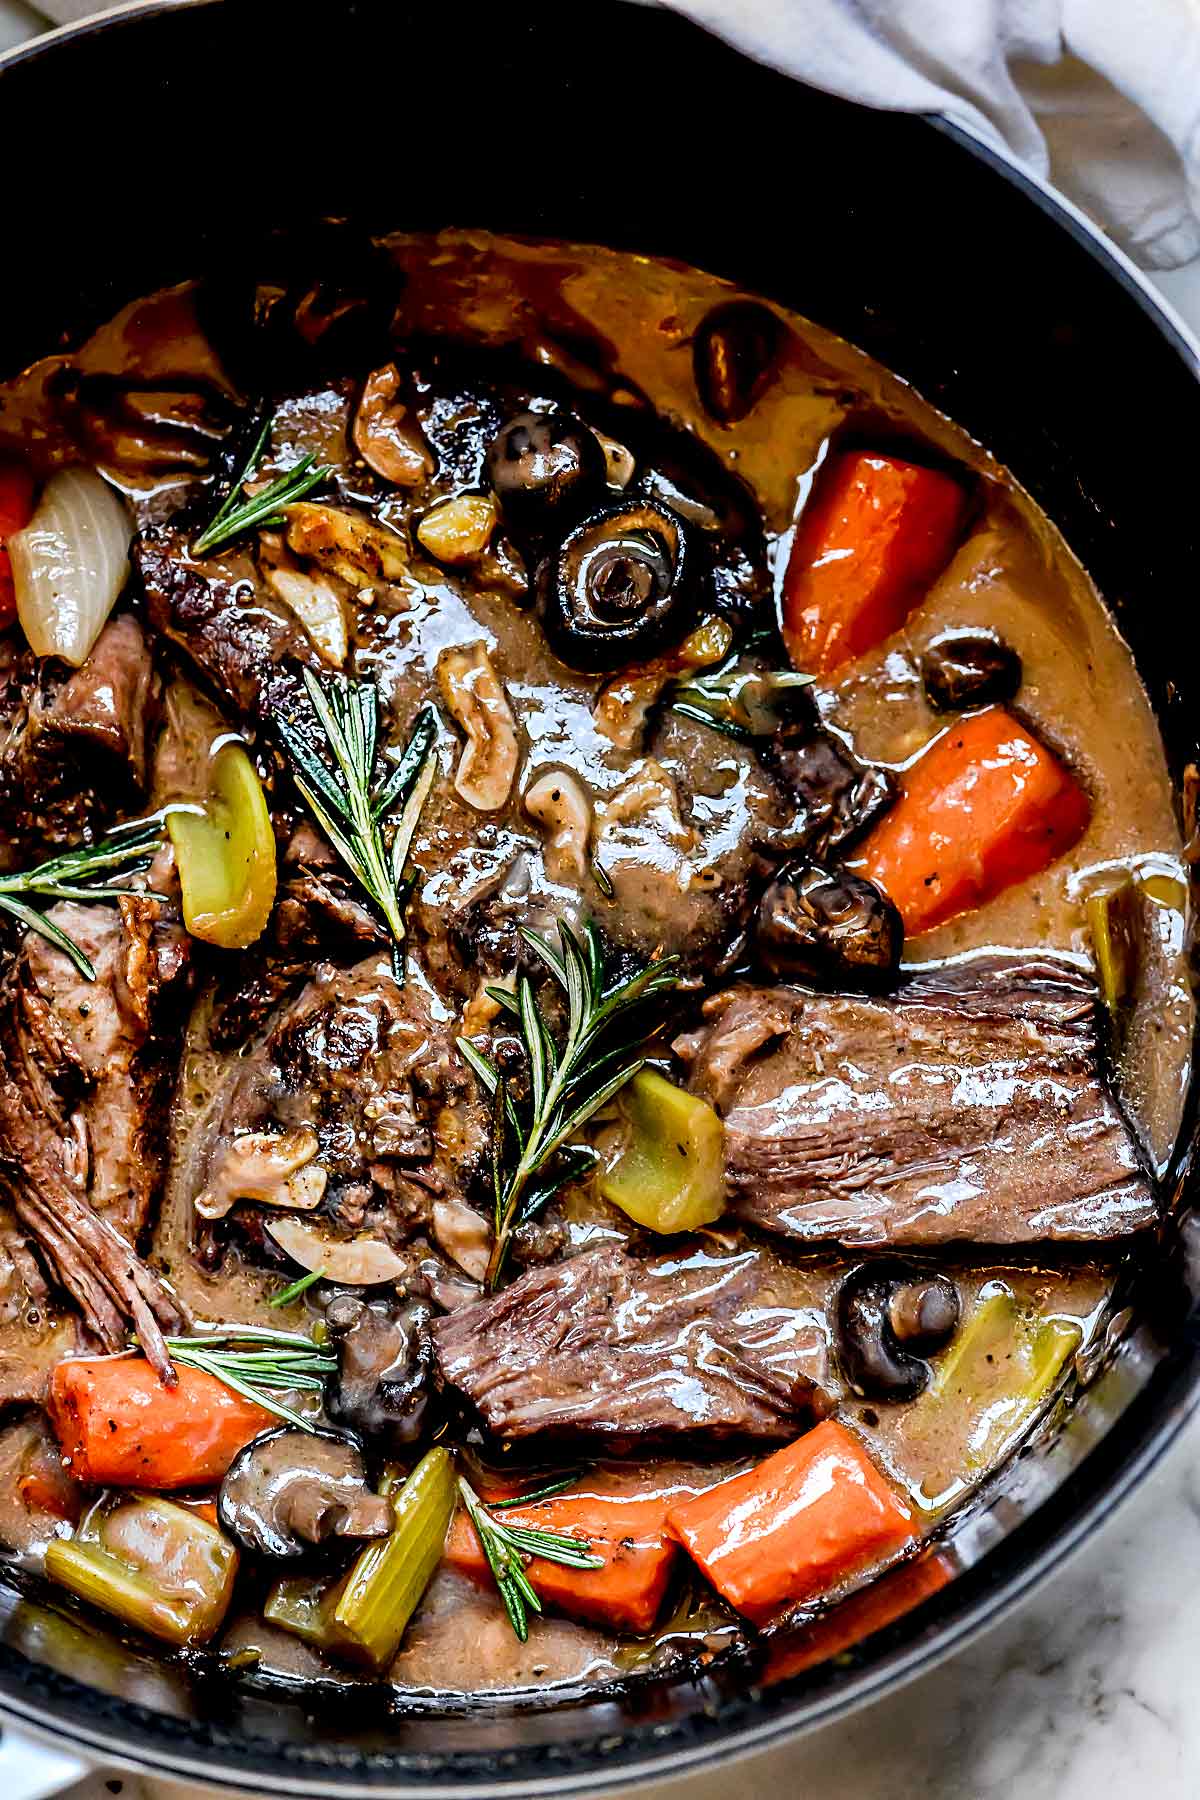 Old Fashioned Pot Roast Slow Cooker Recipe - A Year of Slow Cooking